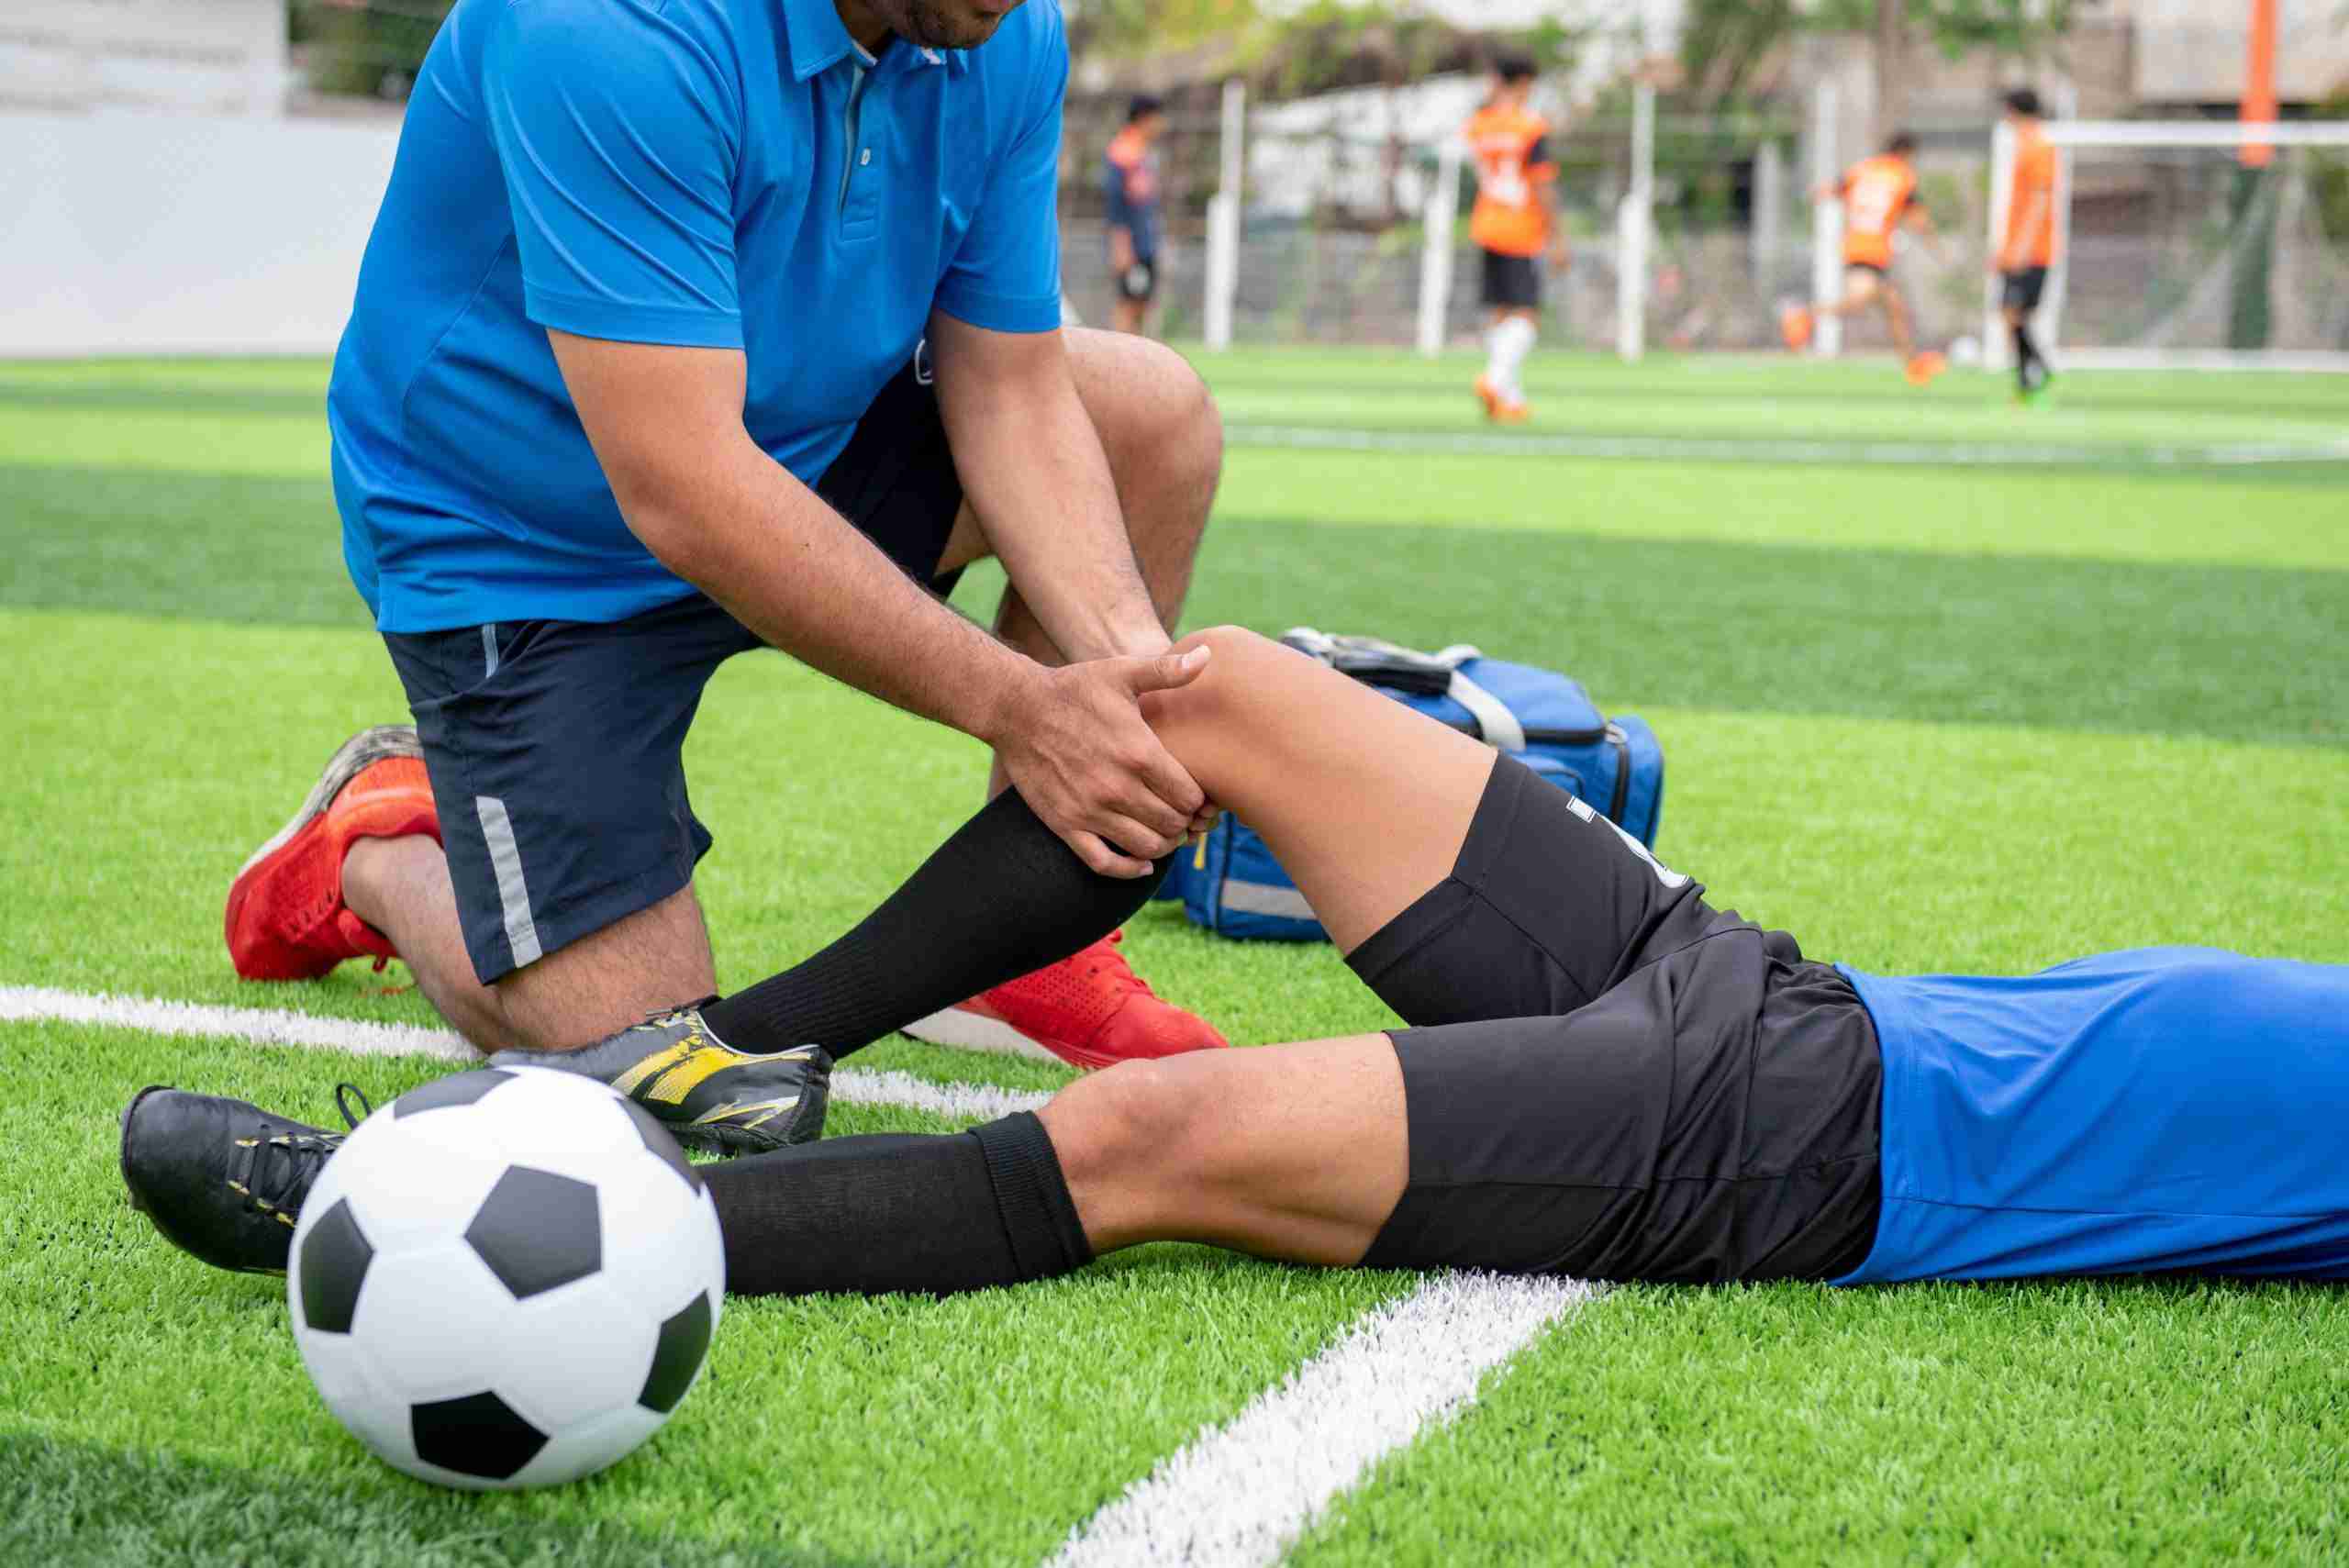 What are 3 signs and symptoms of an ACL tear?